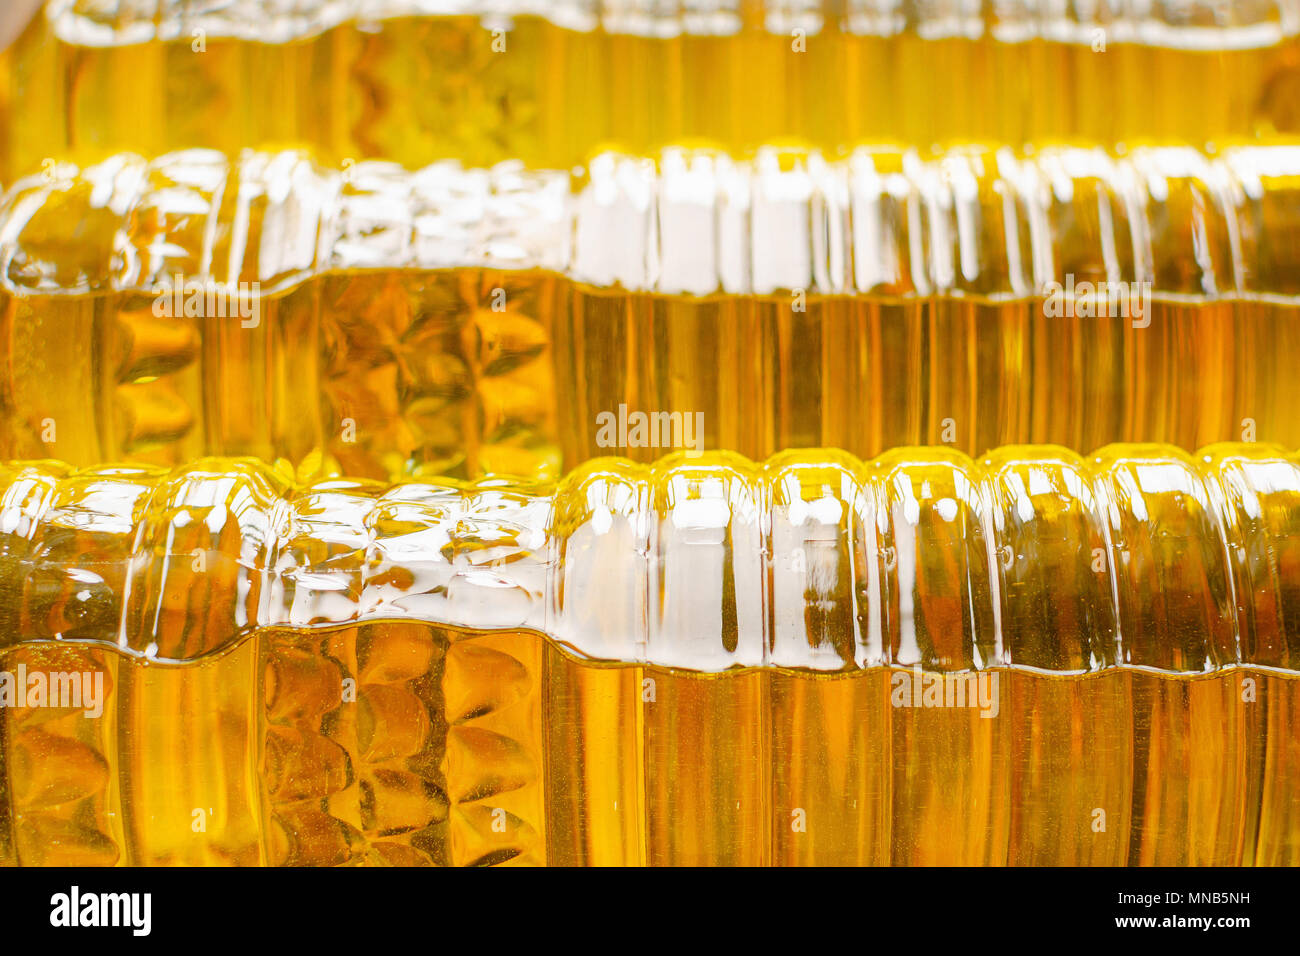 Sunflower oil. Olive oil. Bottles with butter on a wooden table. Stock Photo